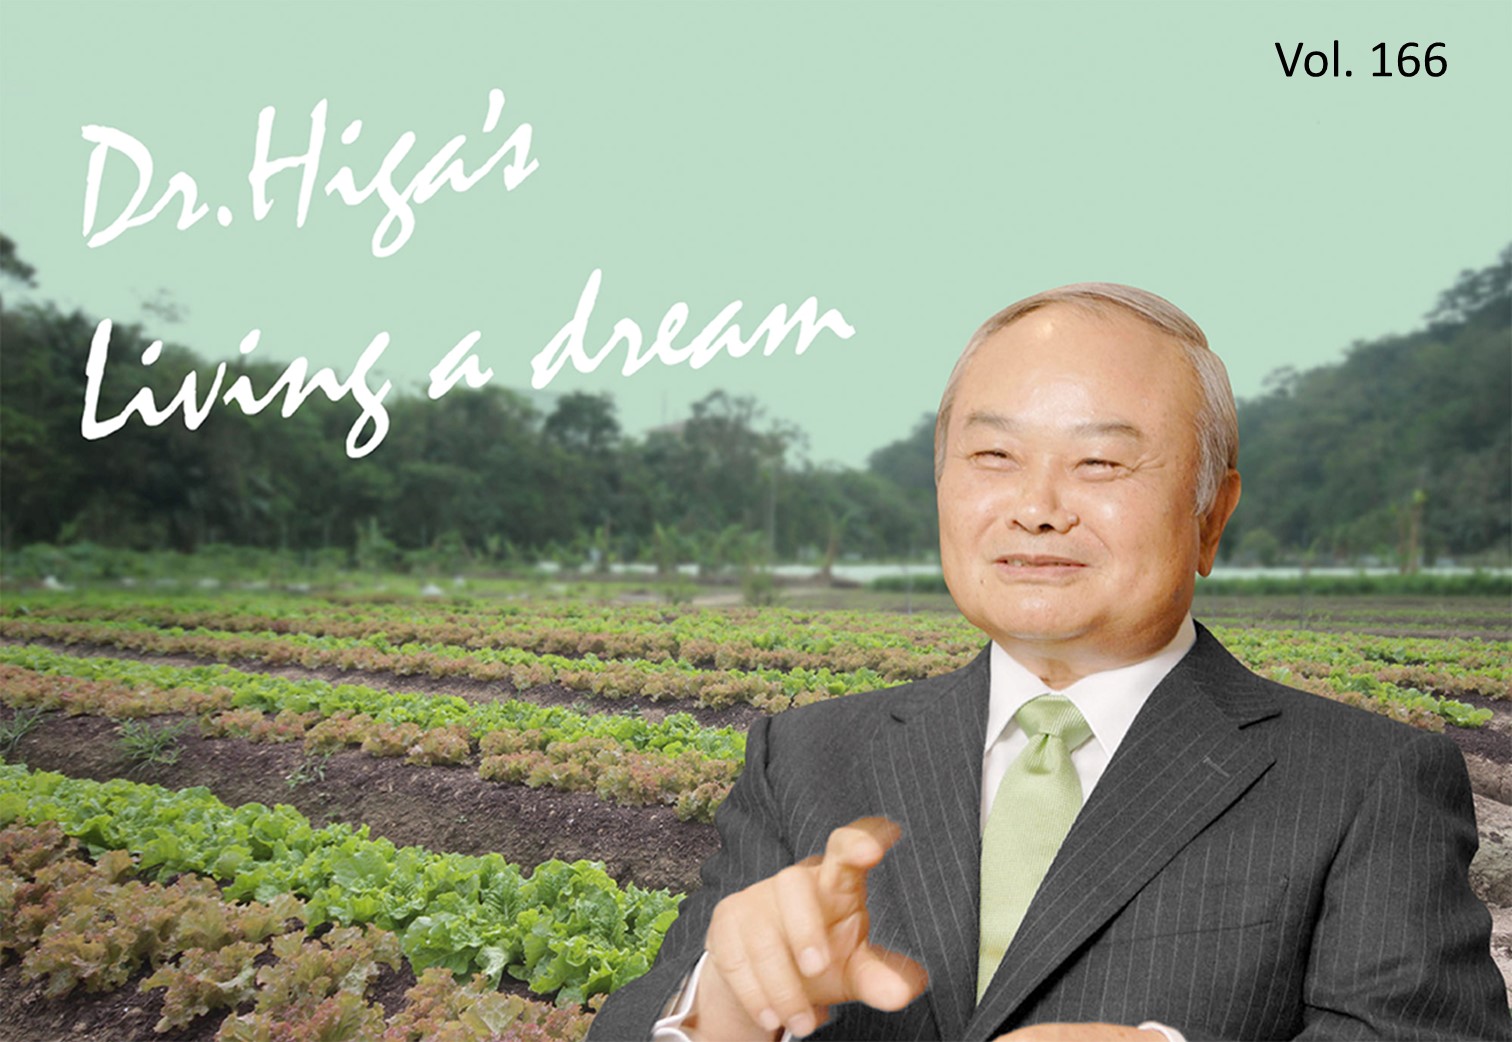 Dr. Higa's "Living a Dream": the latest article #166 is up!!!